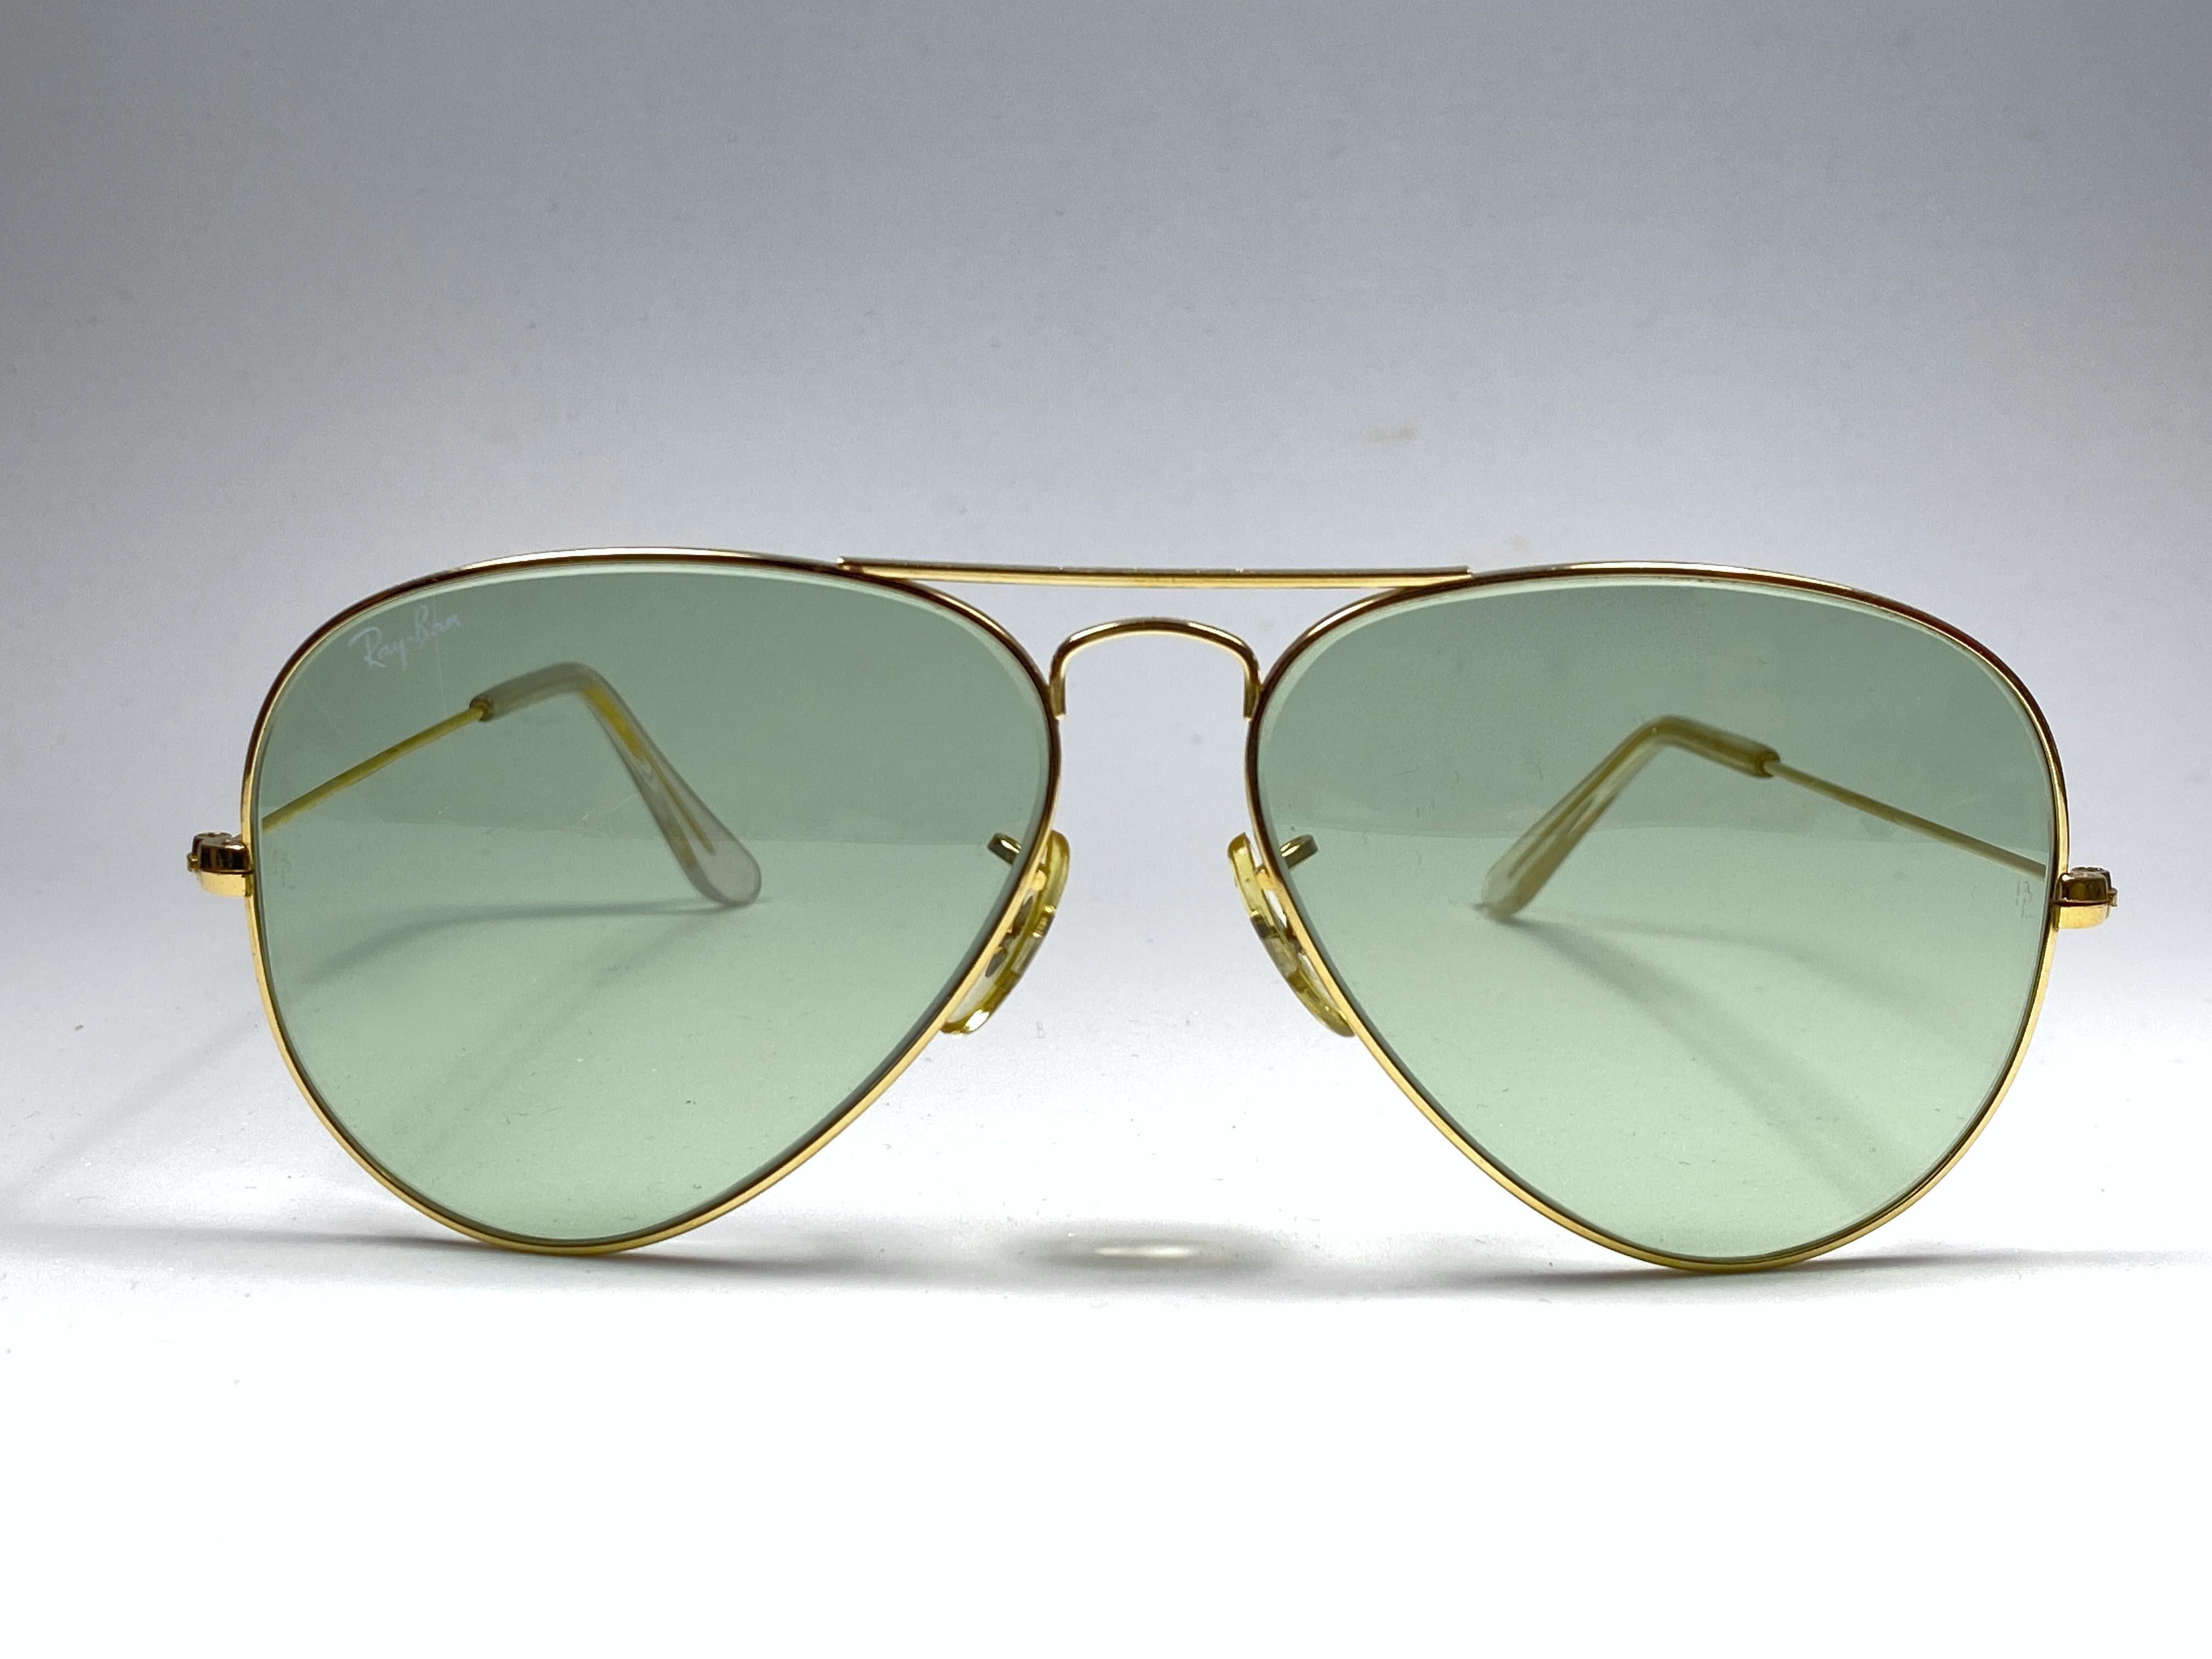 Vintage Ray Ban Aviator gold 58MM with RB3 Green Lenses.


Light sign of wear due to storage. Original Ray Ban B&L case.

FRONT : 13.5 CMS

LENS HEIGHT : 5 CMS

LENS WIDTH : 5.8 CMS